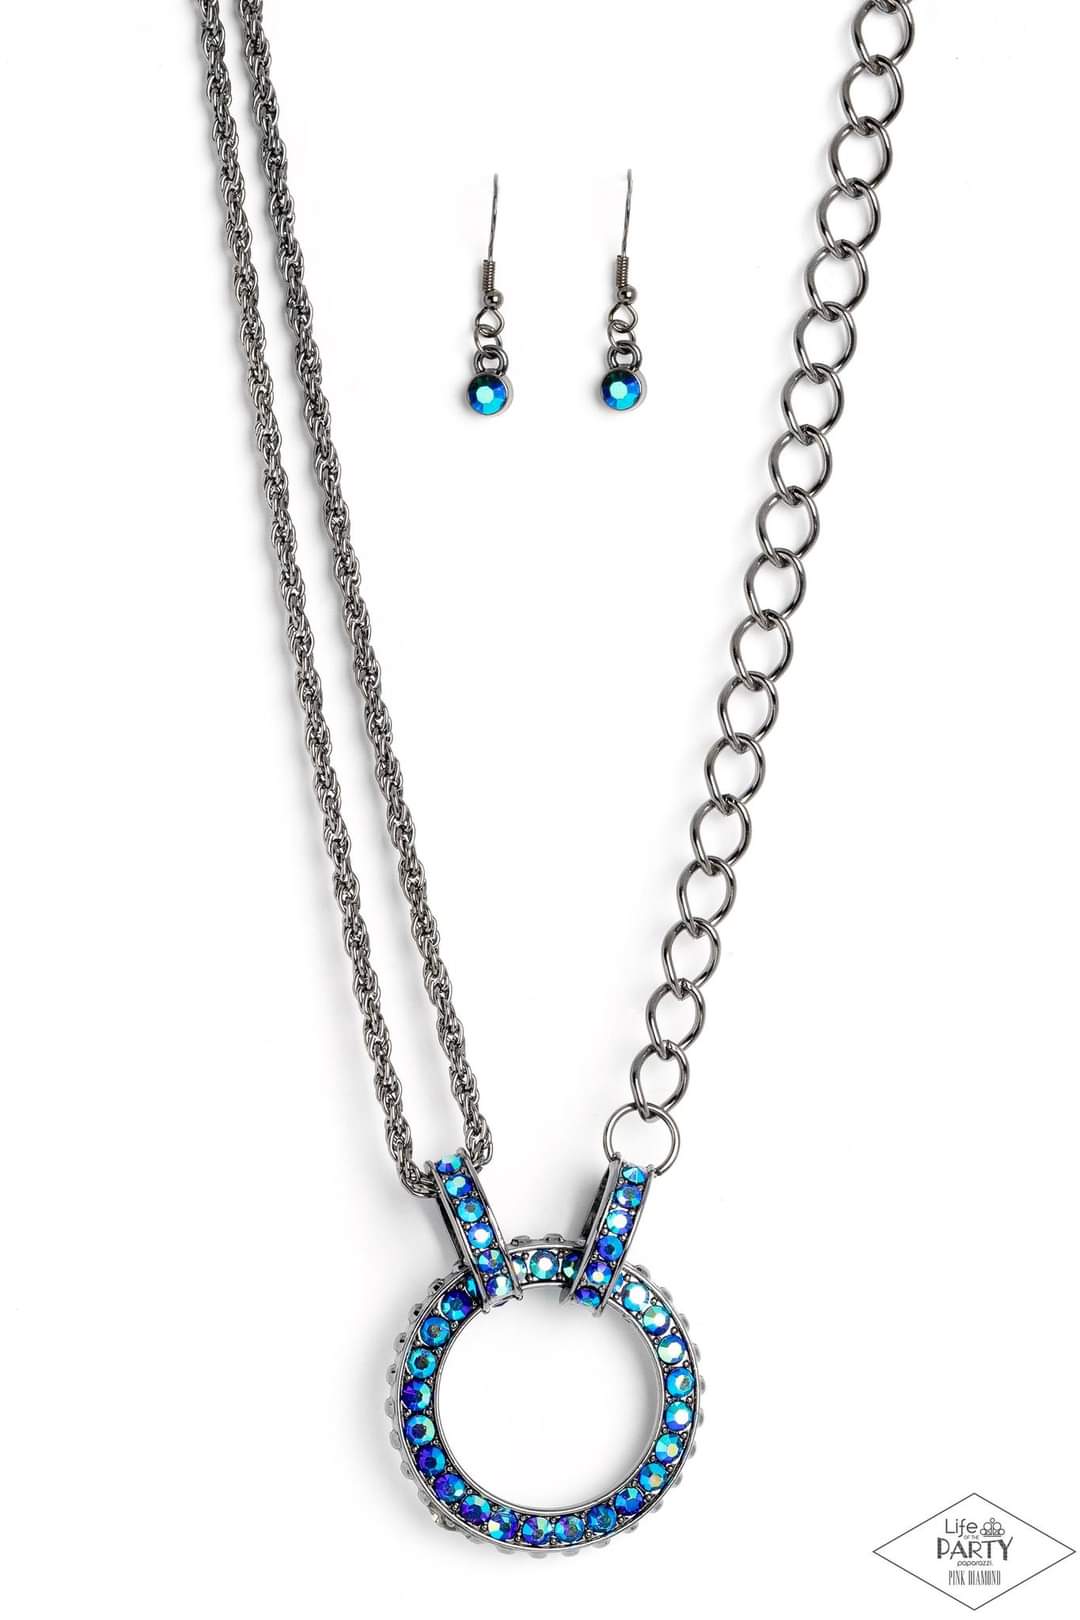 Razzle Dazzle - Blue Necklace - Paparazzi Accessories - A collision of mismatched gunmetal chains gives way to a studded gunmetal pendant that has been encrusted in glittery blue UV rhinestones. The result is a gritty, industrial design with endless attitude. Features an adjustable clasp closure. Sold as one individual necklace. Includes one pair of matching earrings.